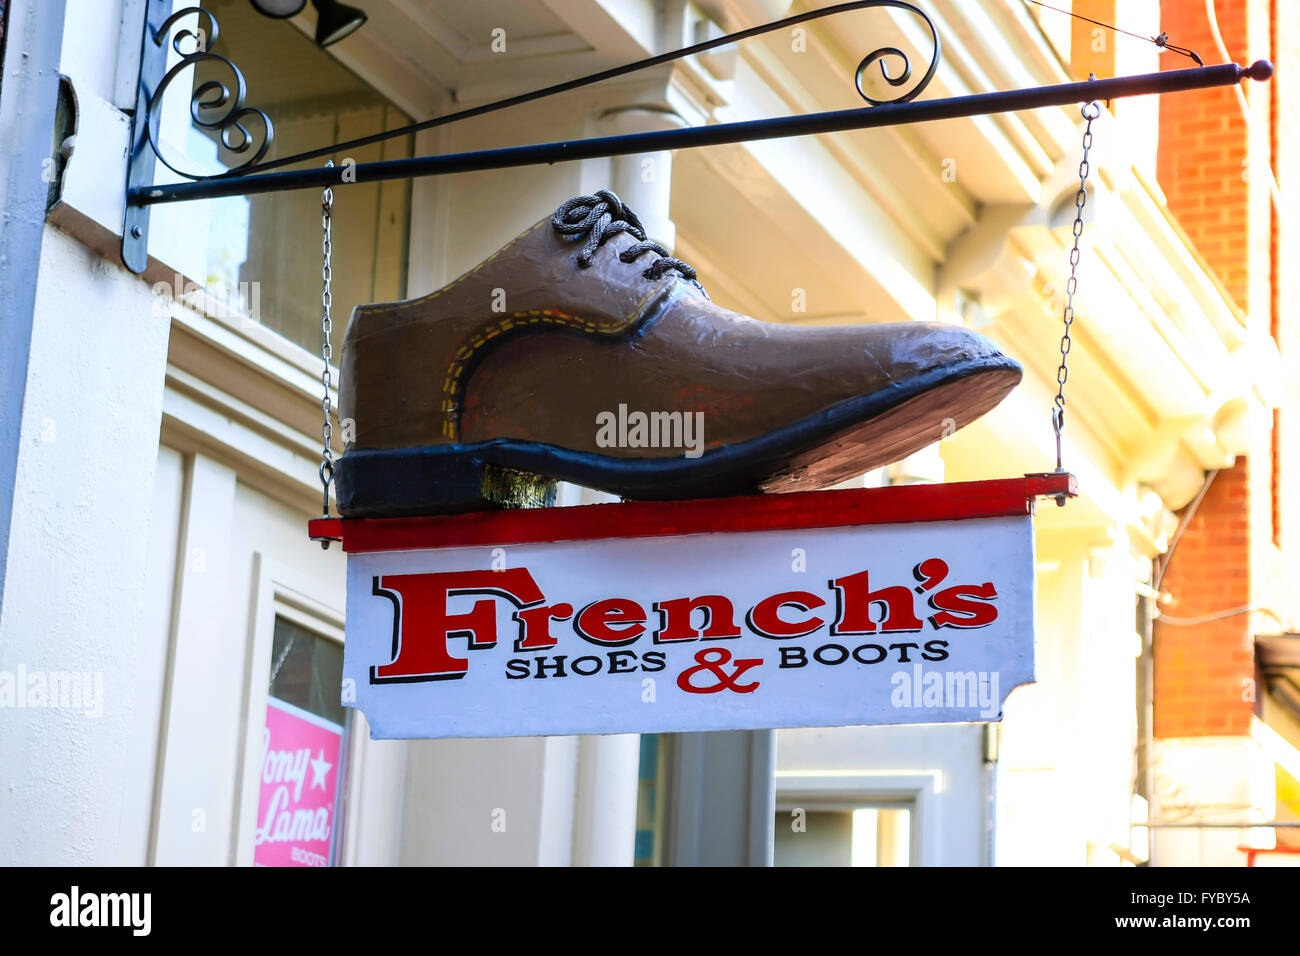 french's boot store nashville